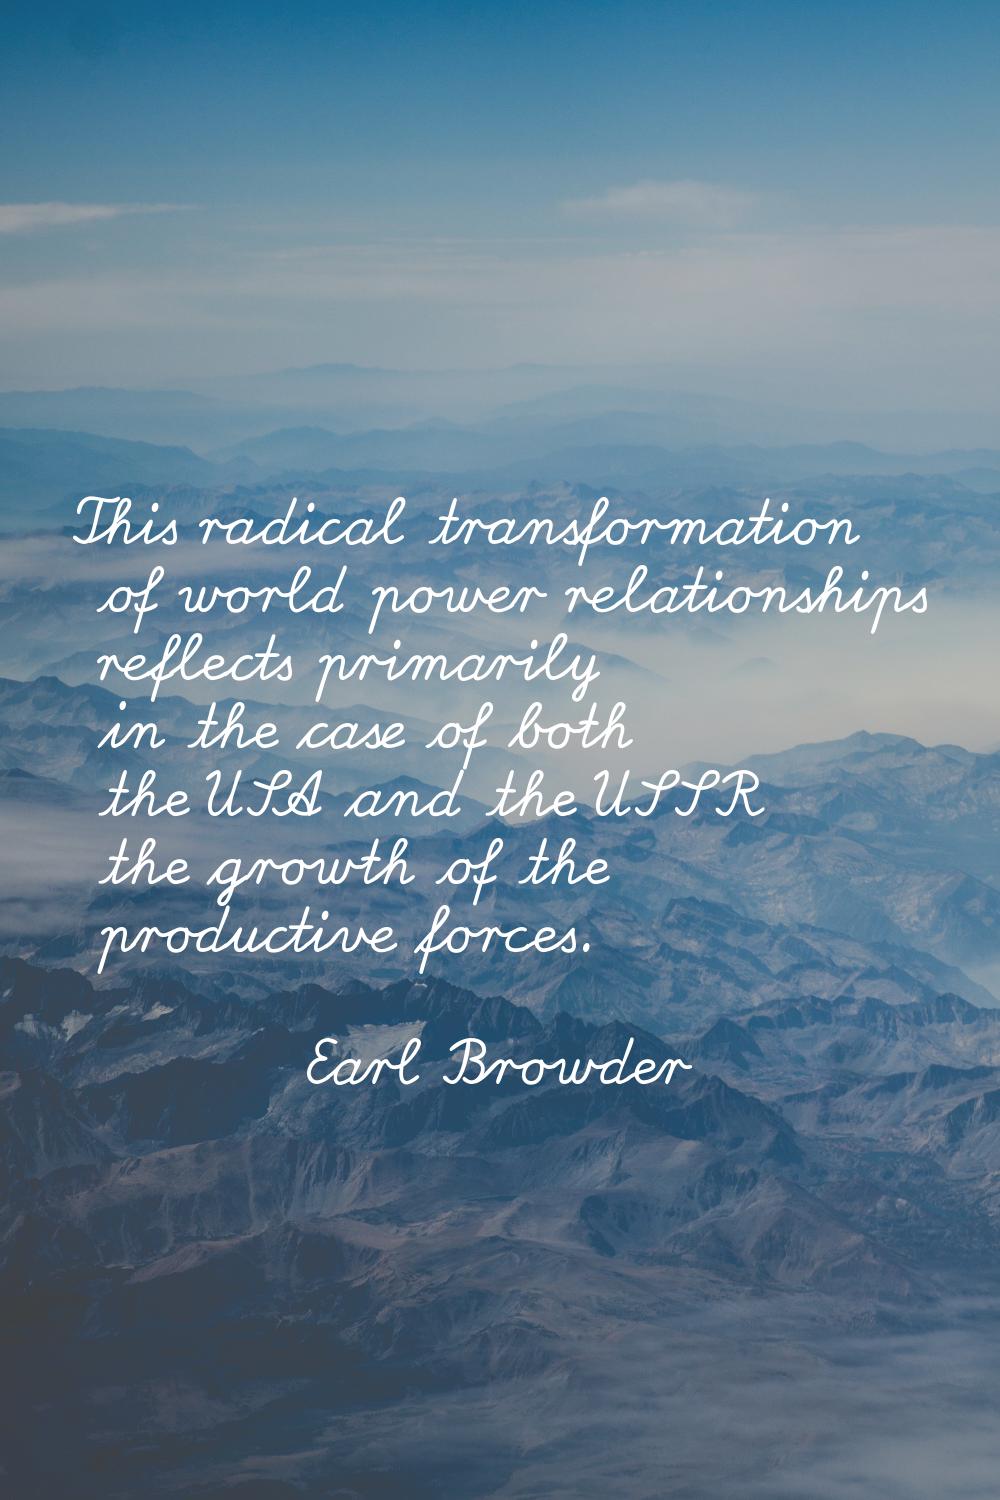 This radical transformation of world power relationships reflects primarily in the case of both the